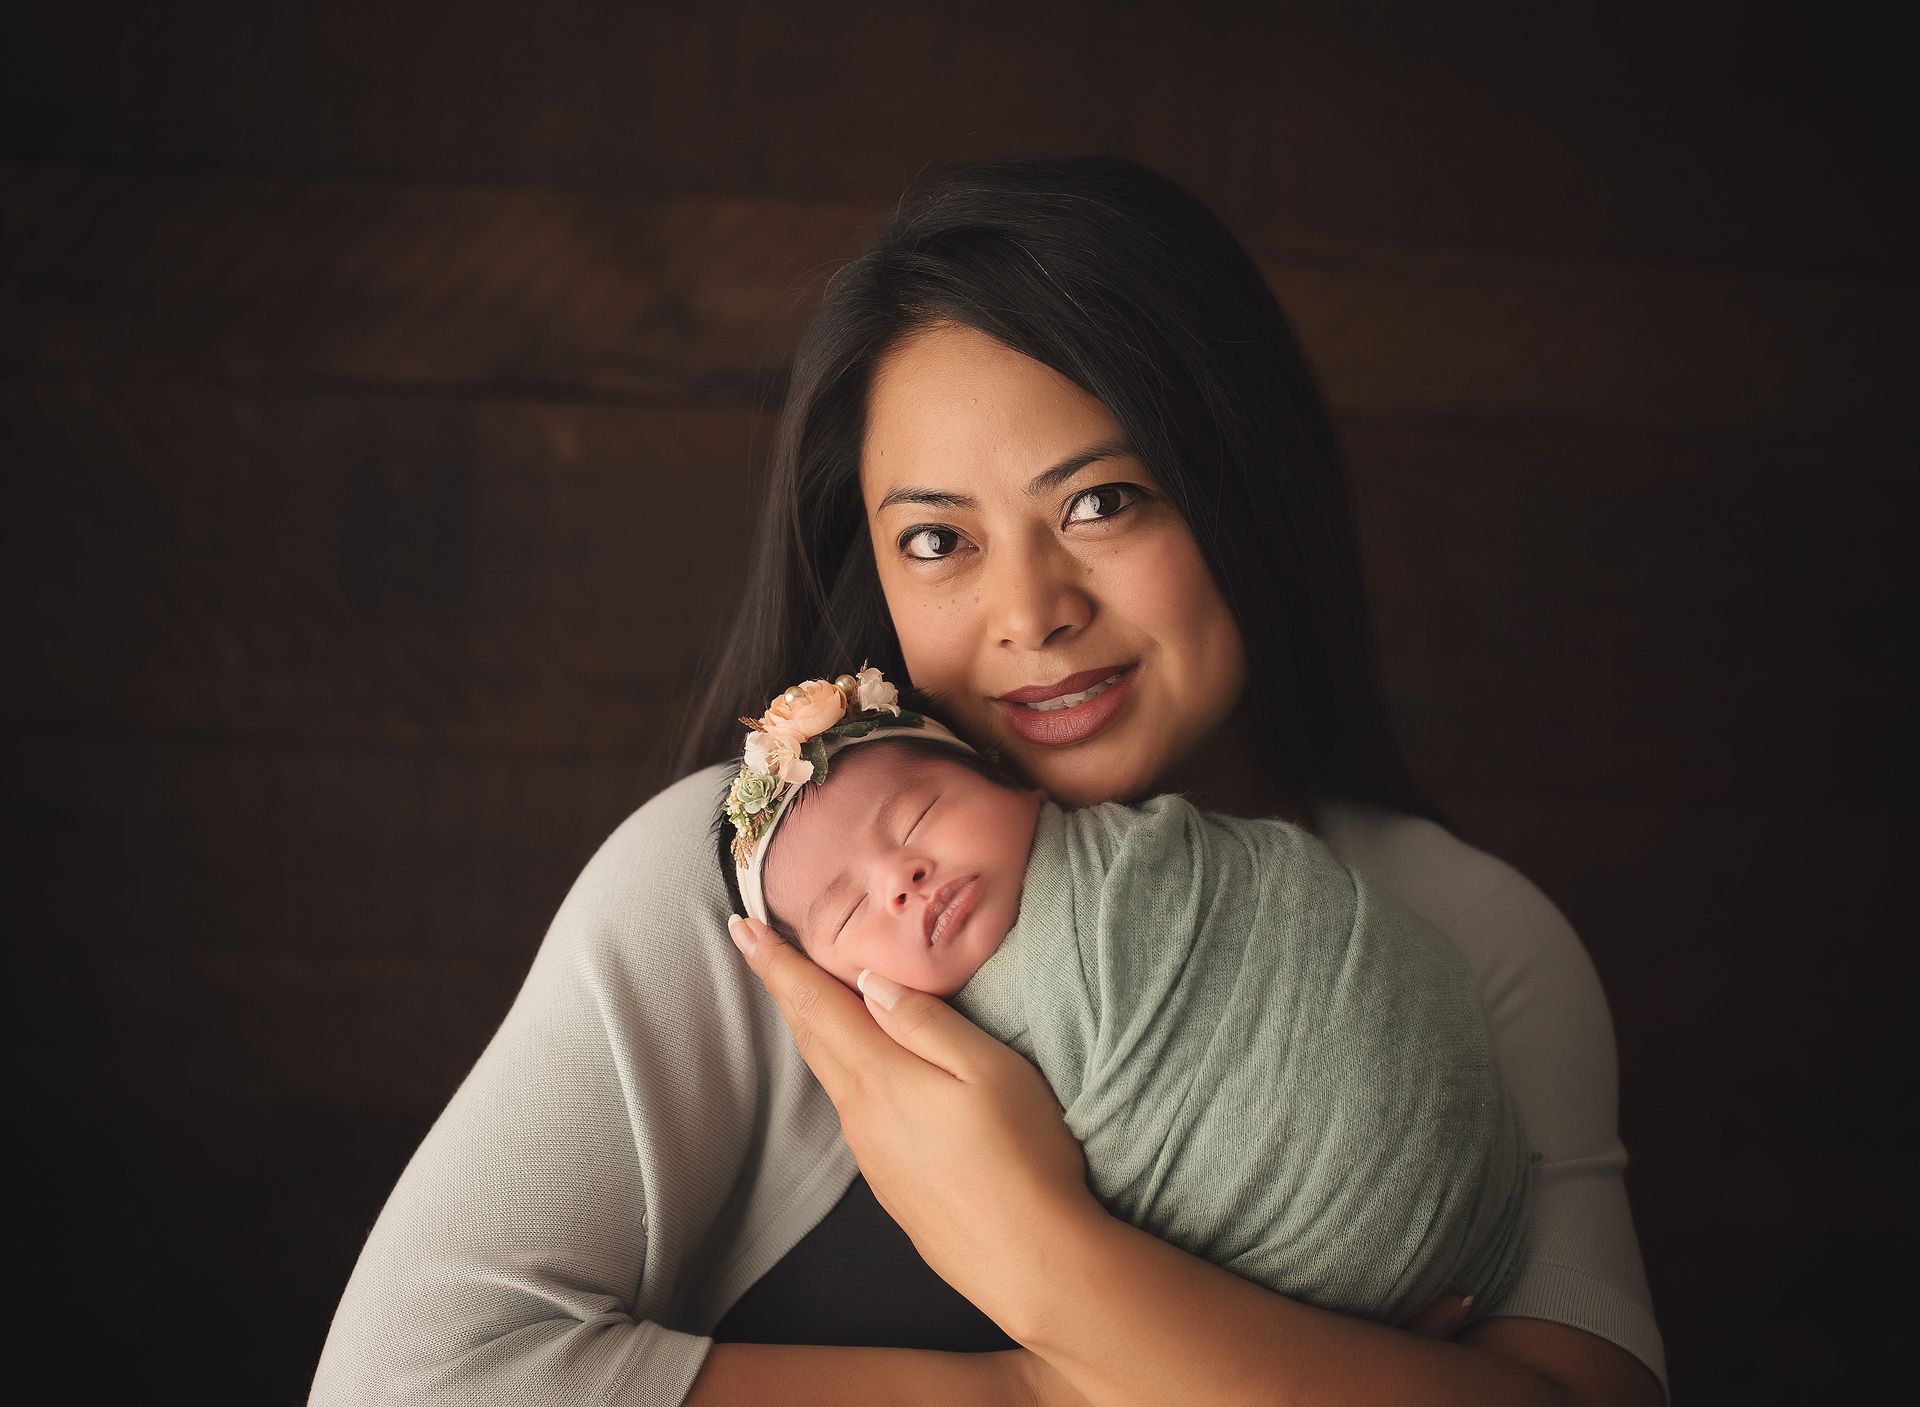 A woman is holding a newborn baby wrapped in a green blanket.